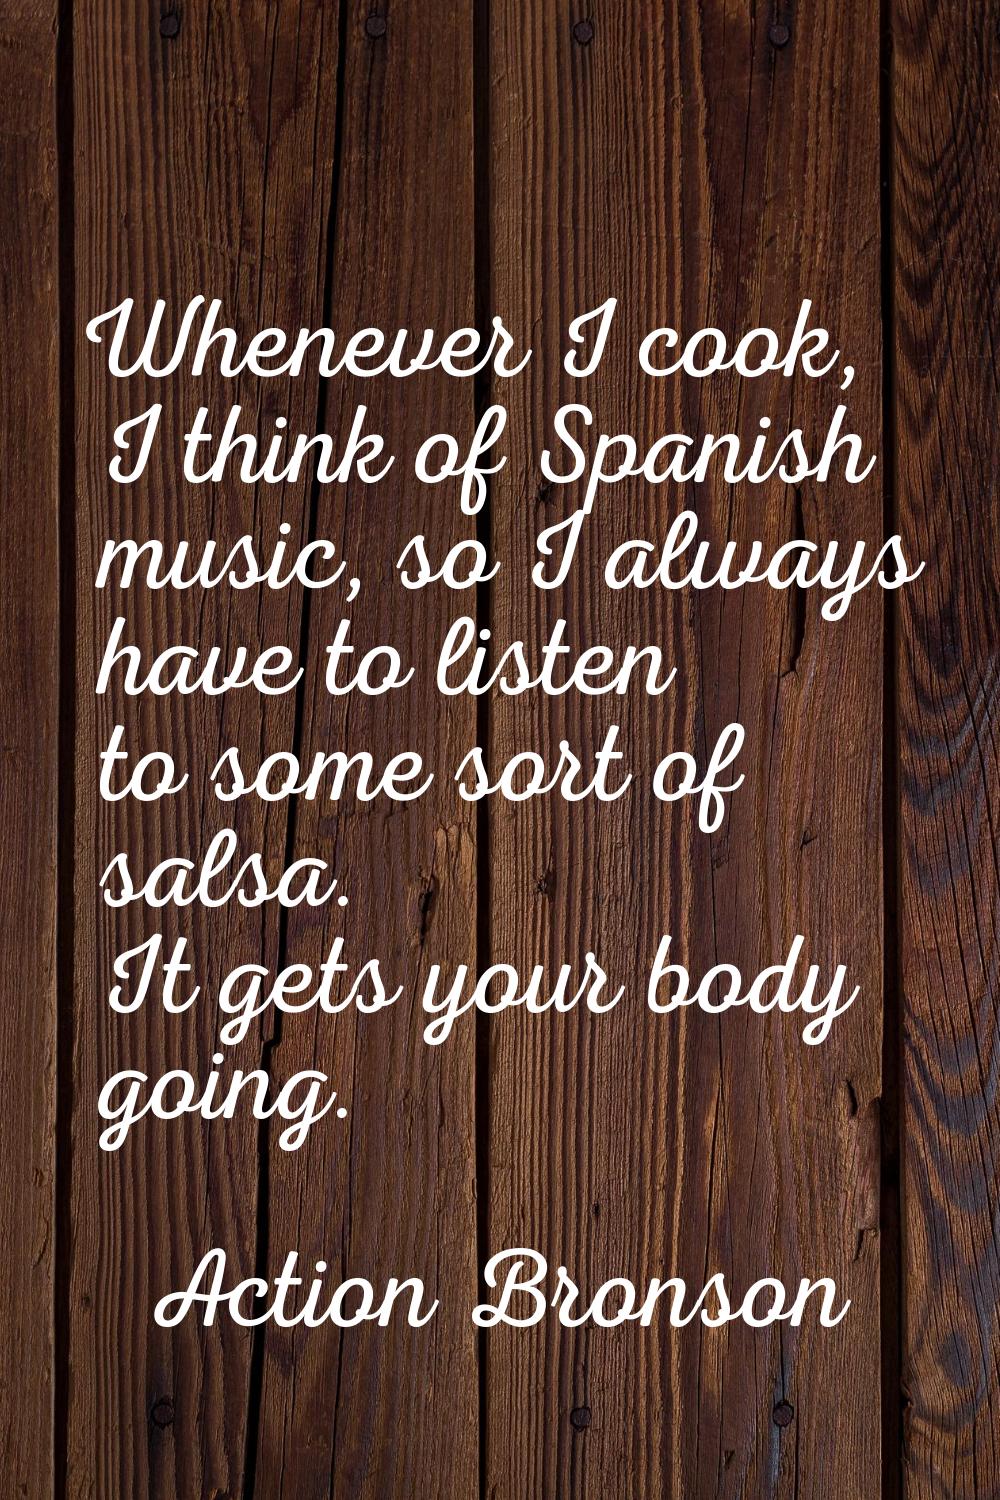 Whenever I cook, I think of Spanish music, so I always have to listen to some sort of salsa. It get